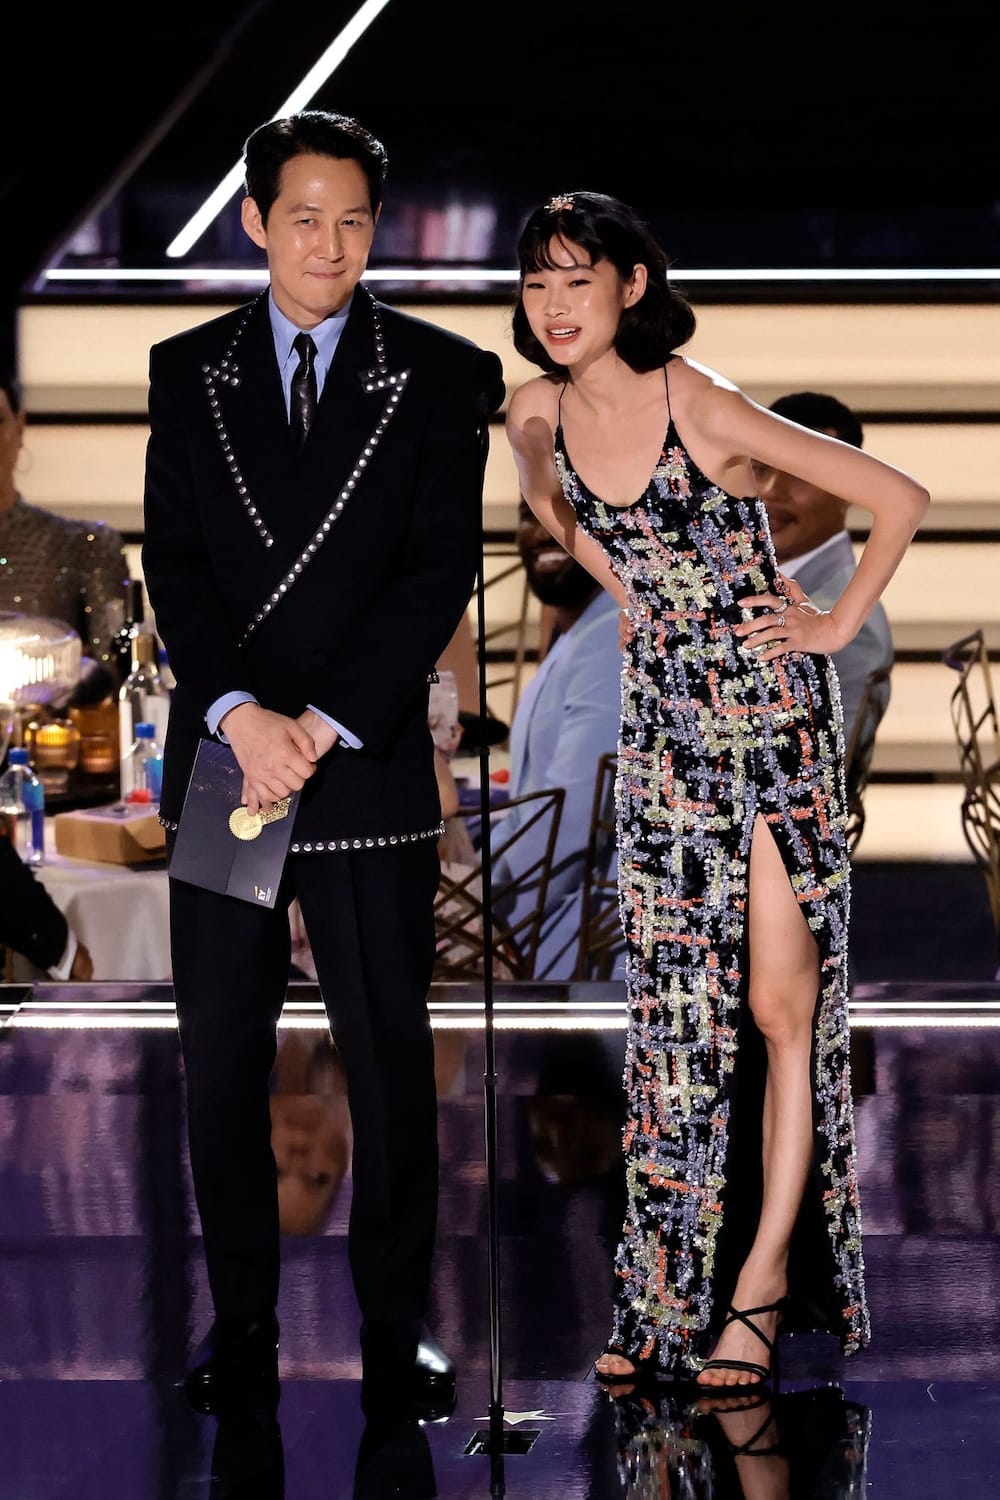 HoYeon on-stage with Lee Jung-jae, who won the ‘Outstanding Lead Actor in a Drama Series’ for Squid Game.